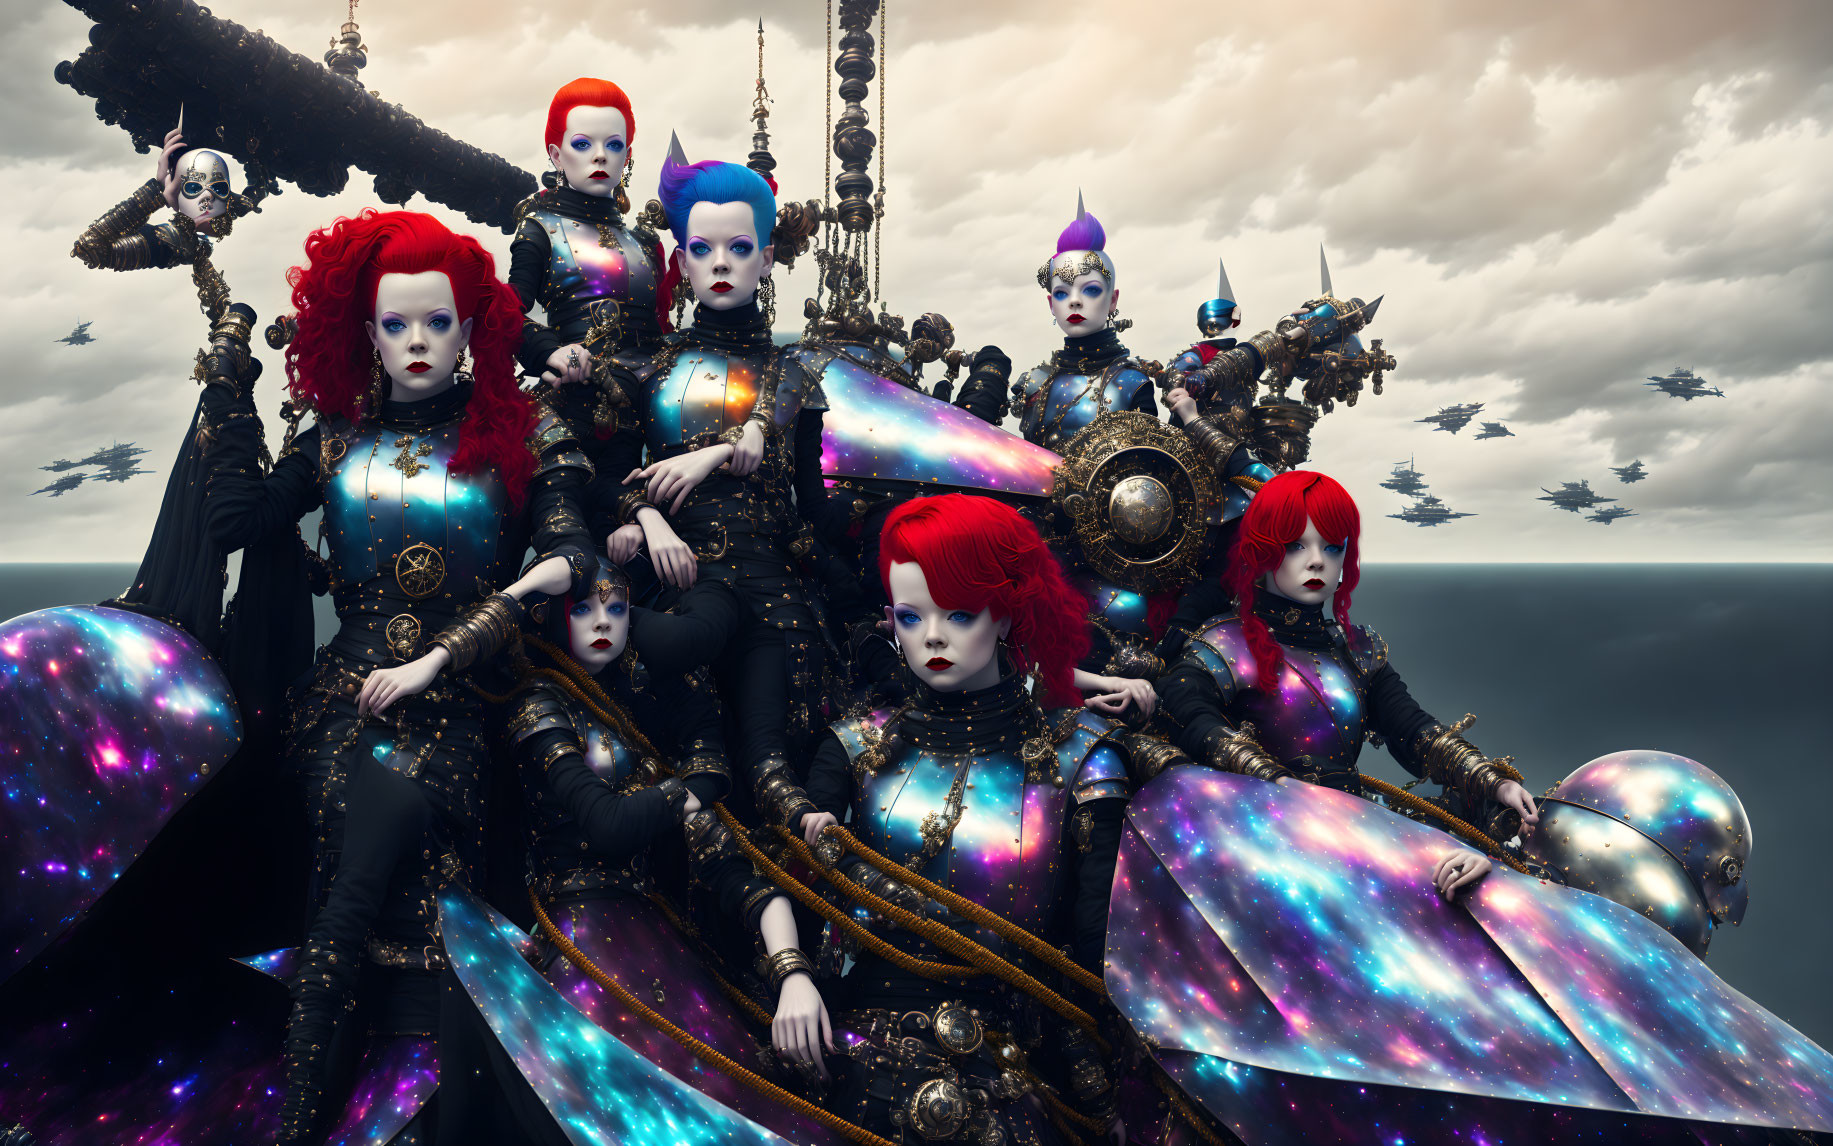 Multiple characters with red and blue hair in cosmic costumes against dramatic sky